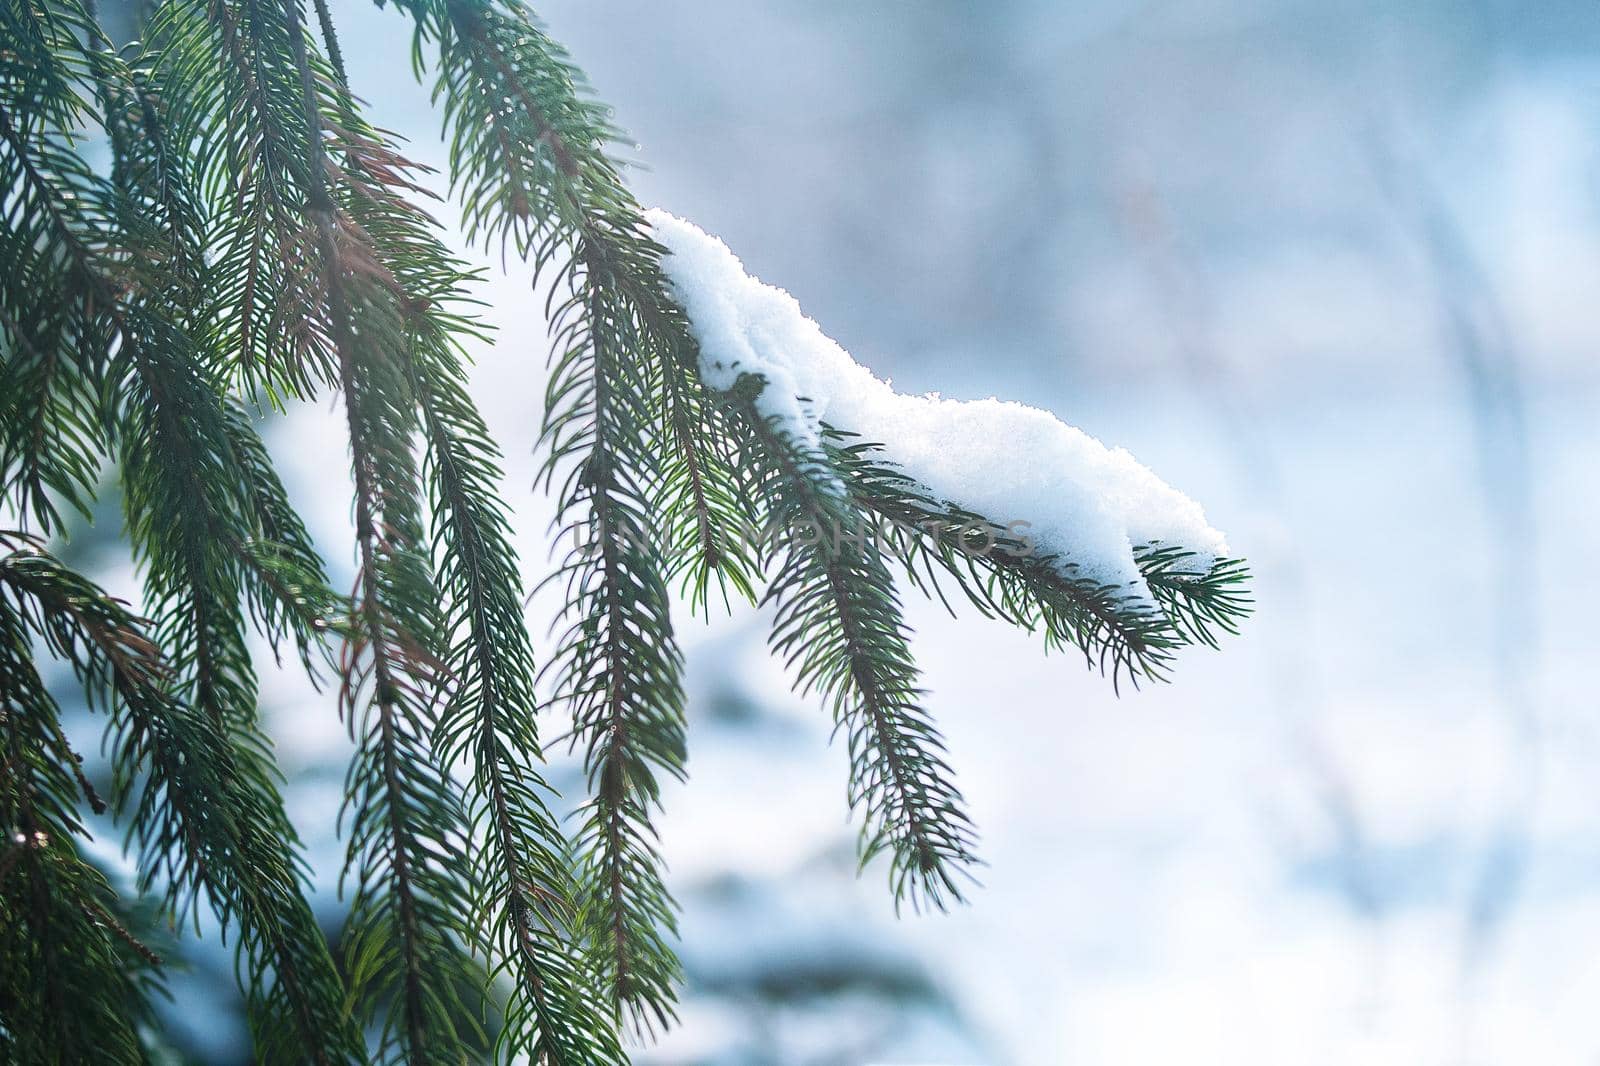 frost and snow on green needles of fir trees by Andreua